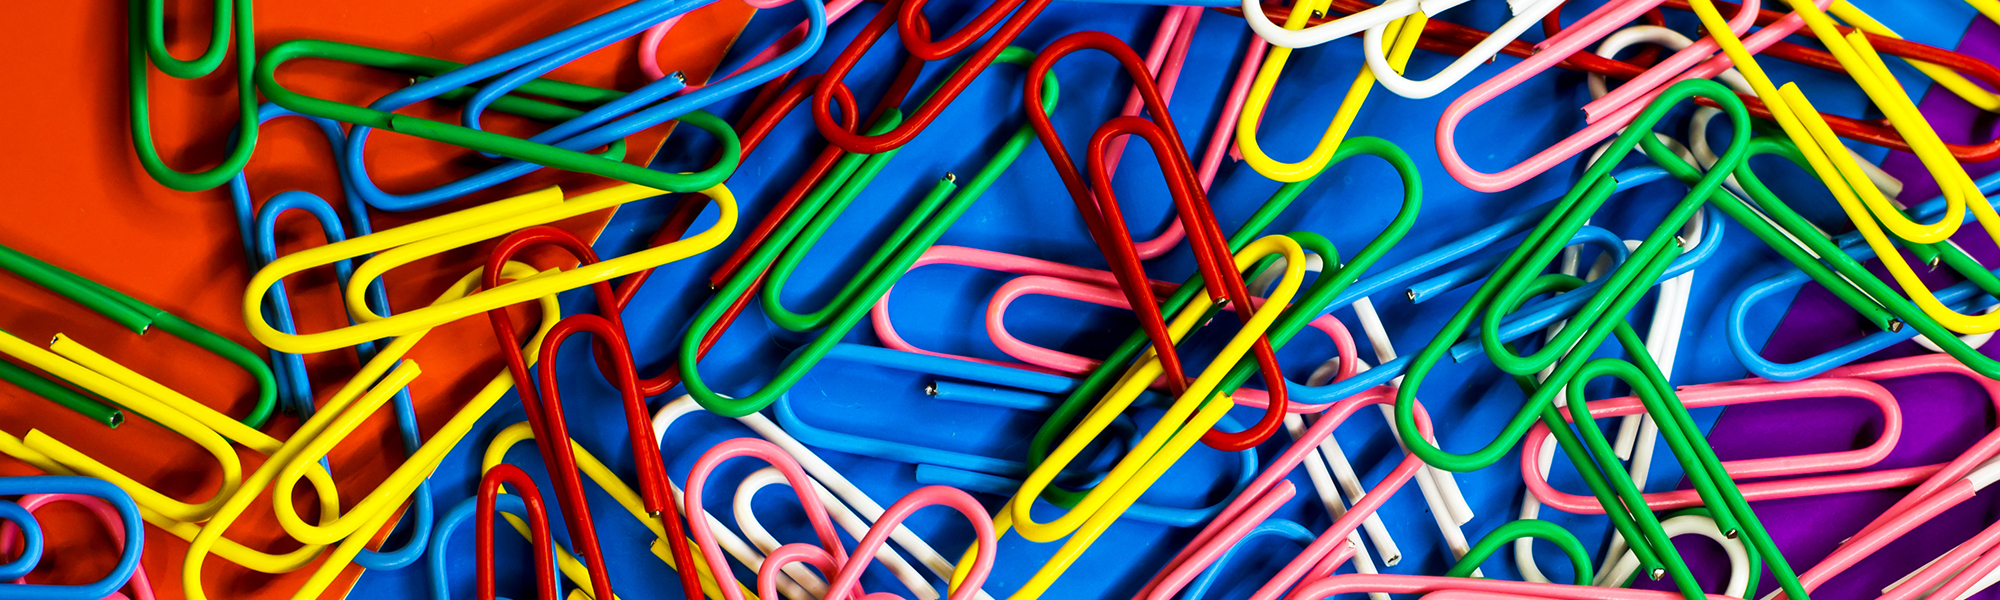 Stationery paper clips of different colors group lie on the background of different colors